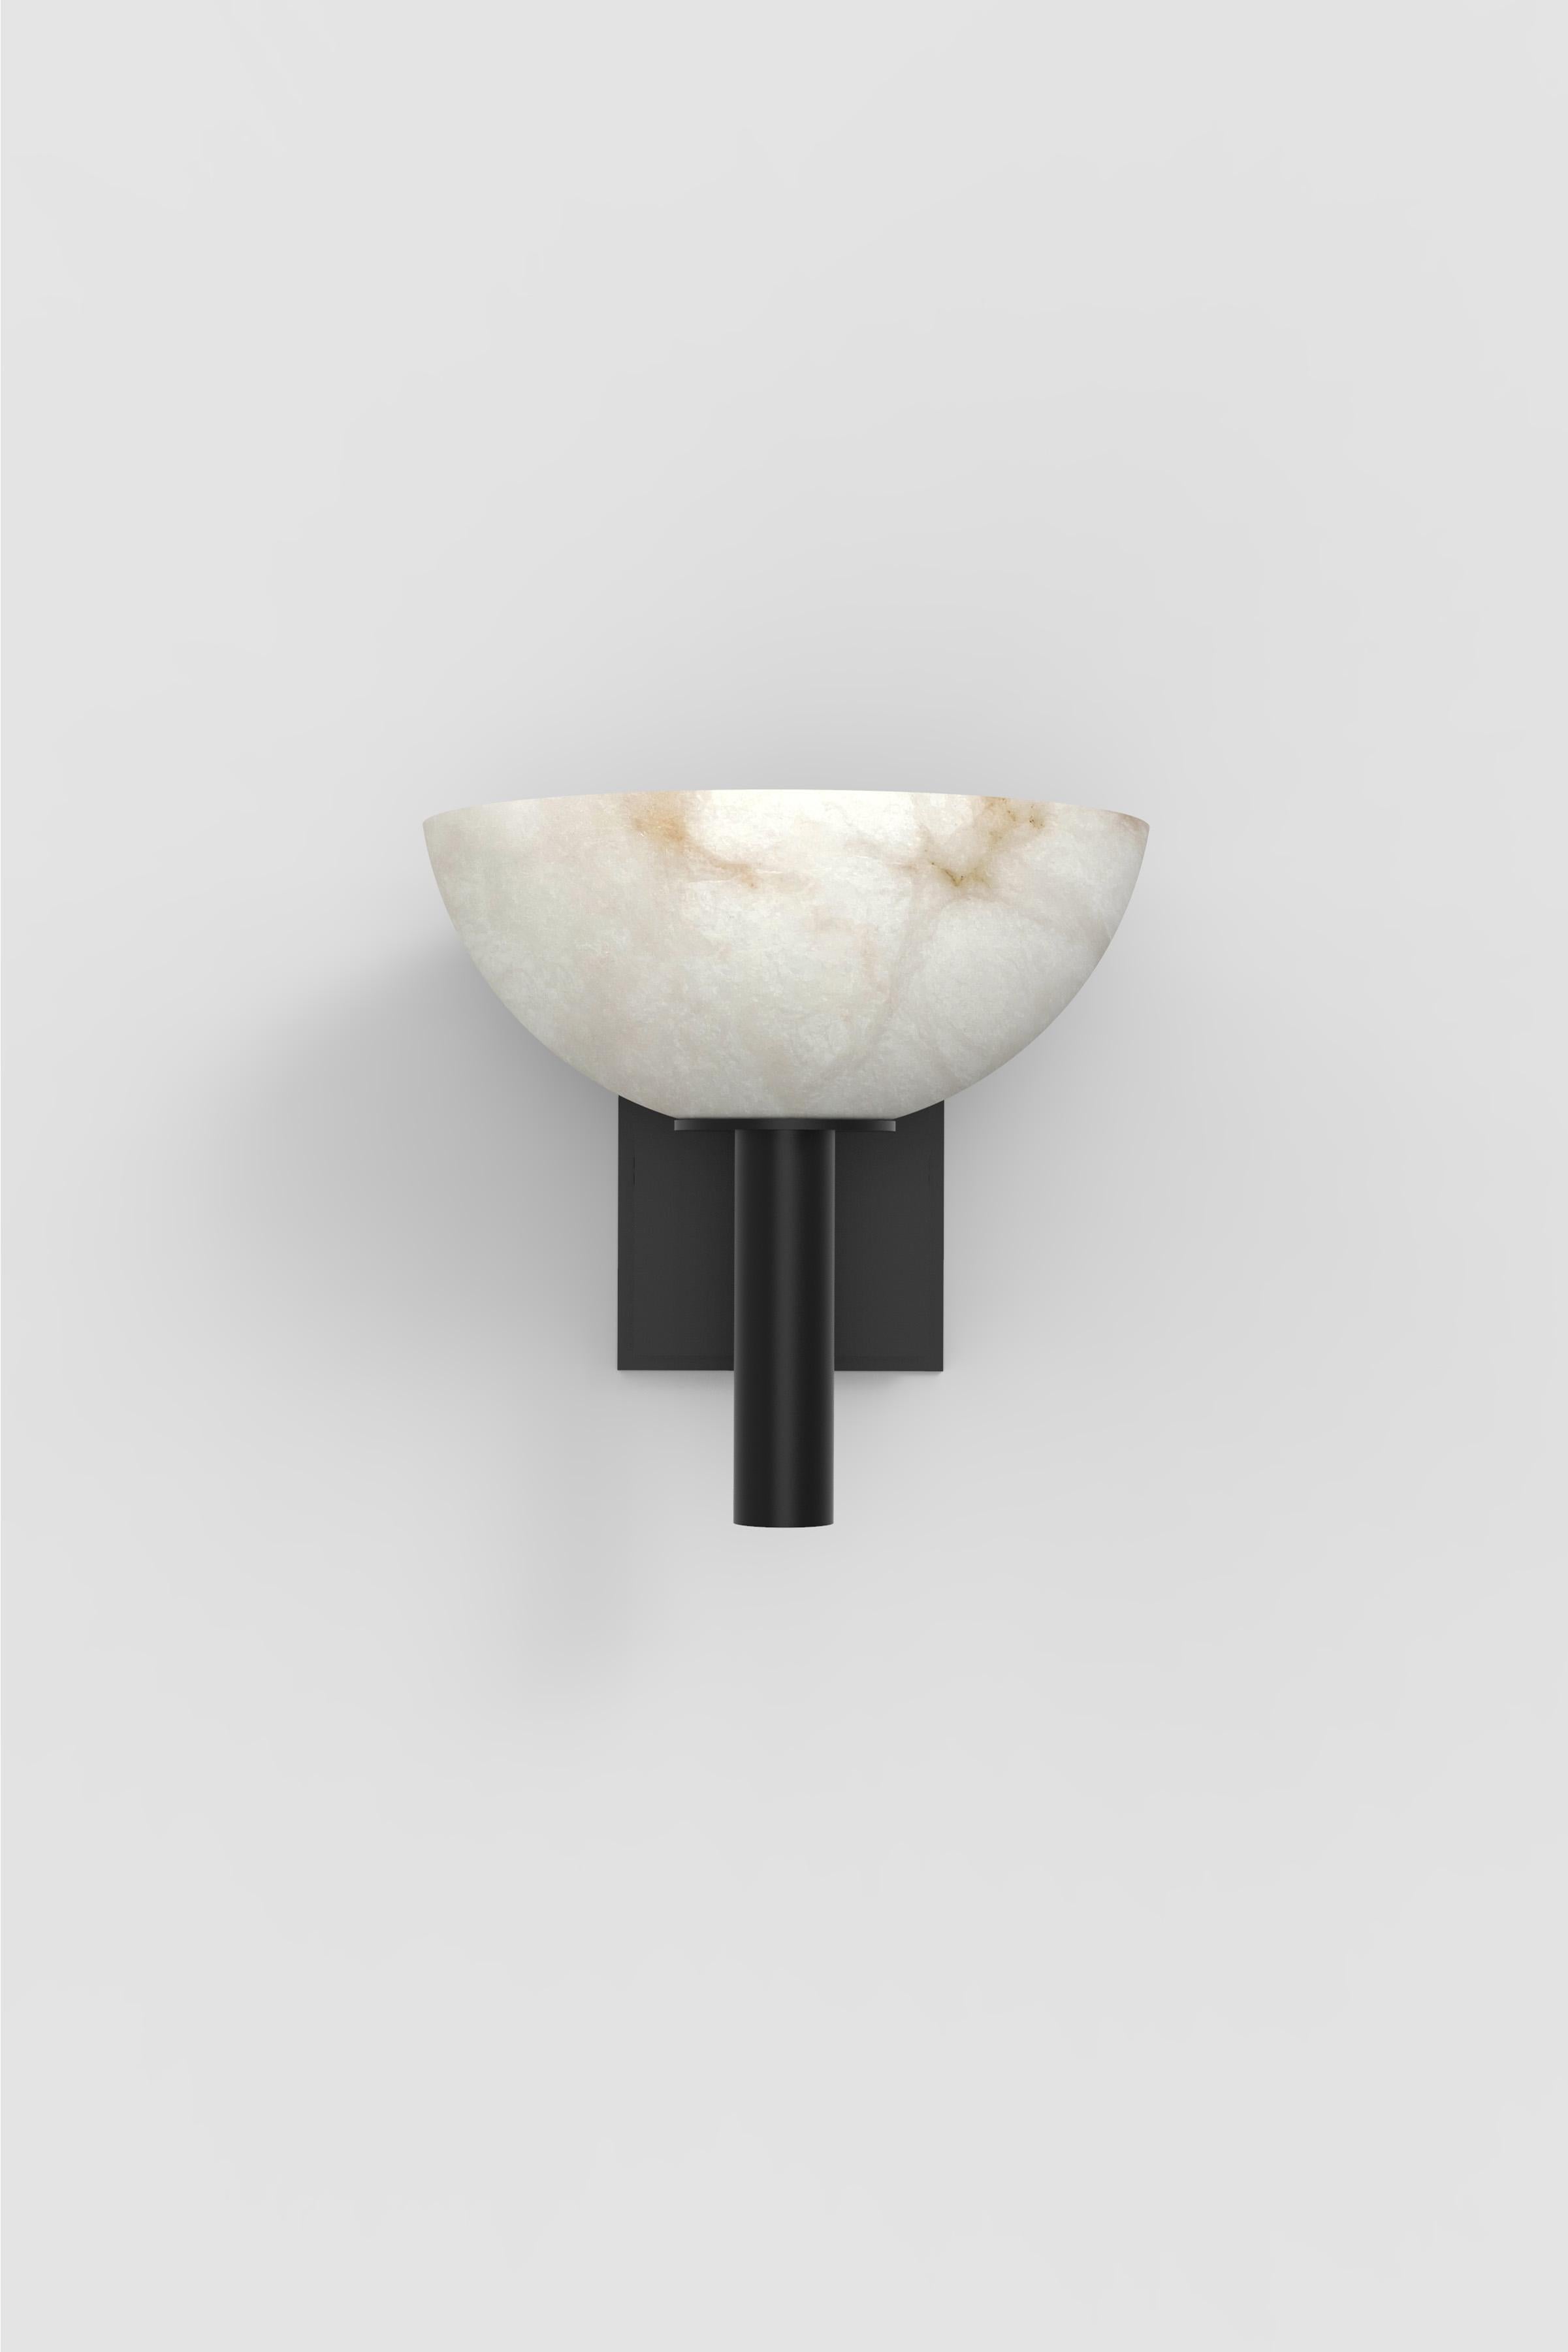 Post-Modern Contemporary Prato Sconce 200A in Alabaster by Orphan Work For Sale